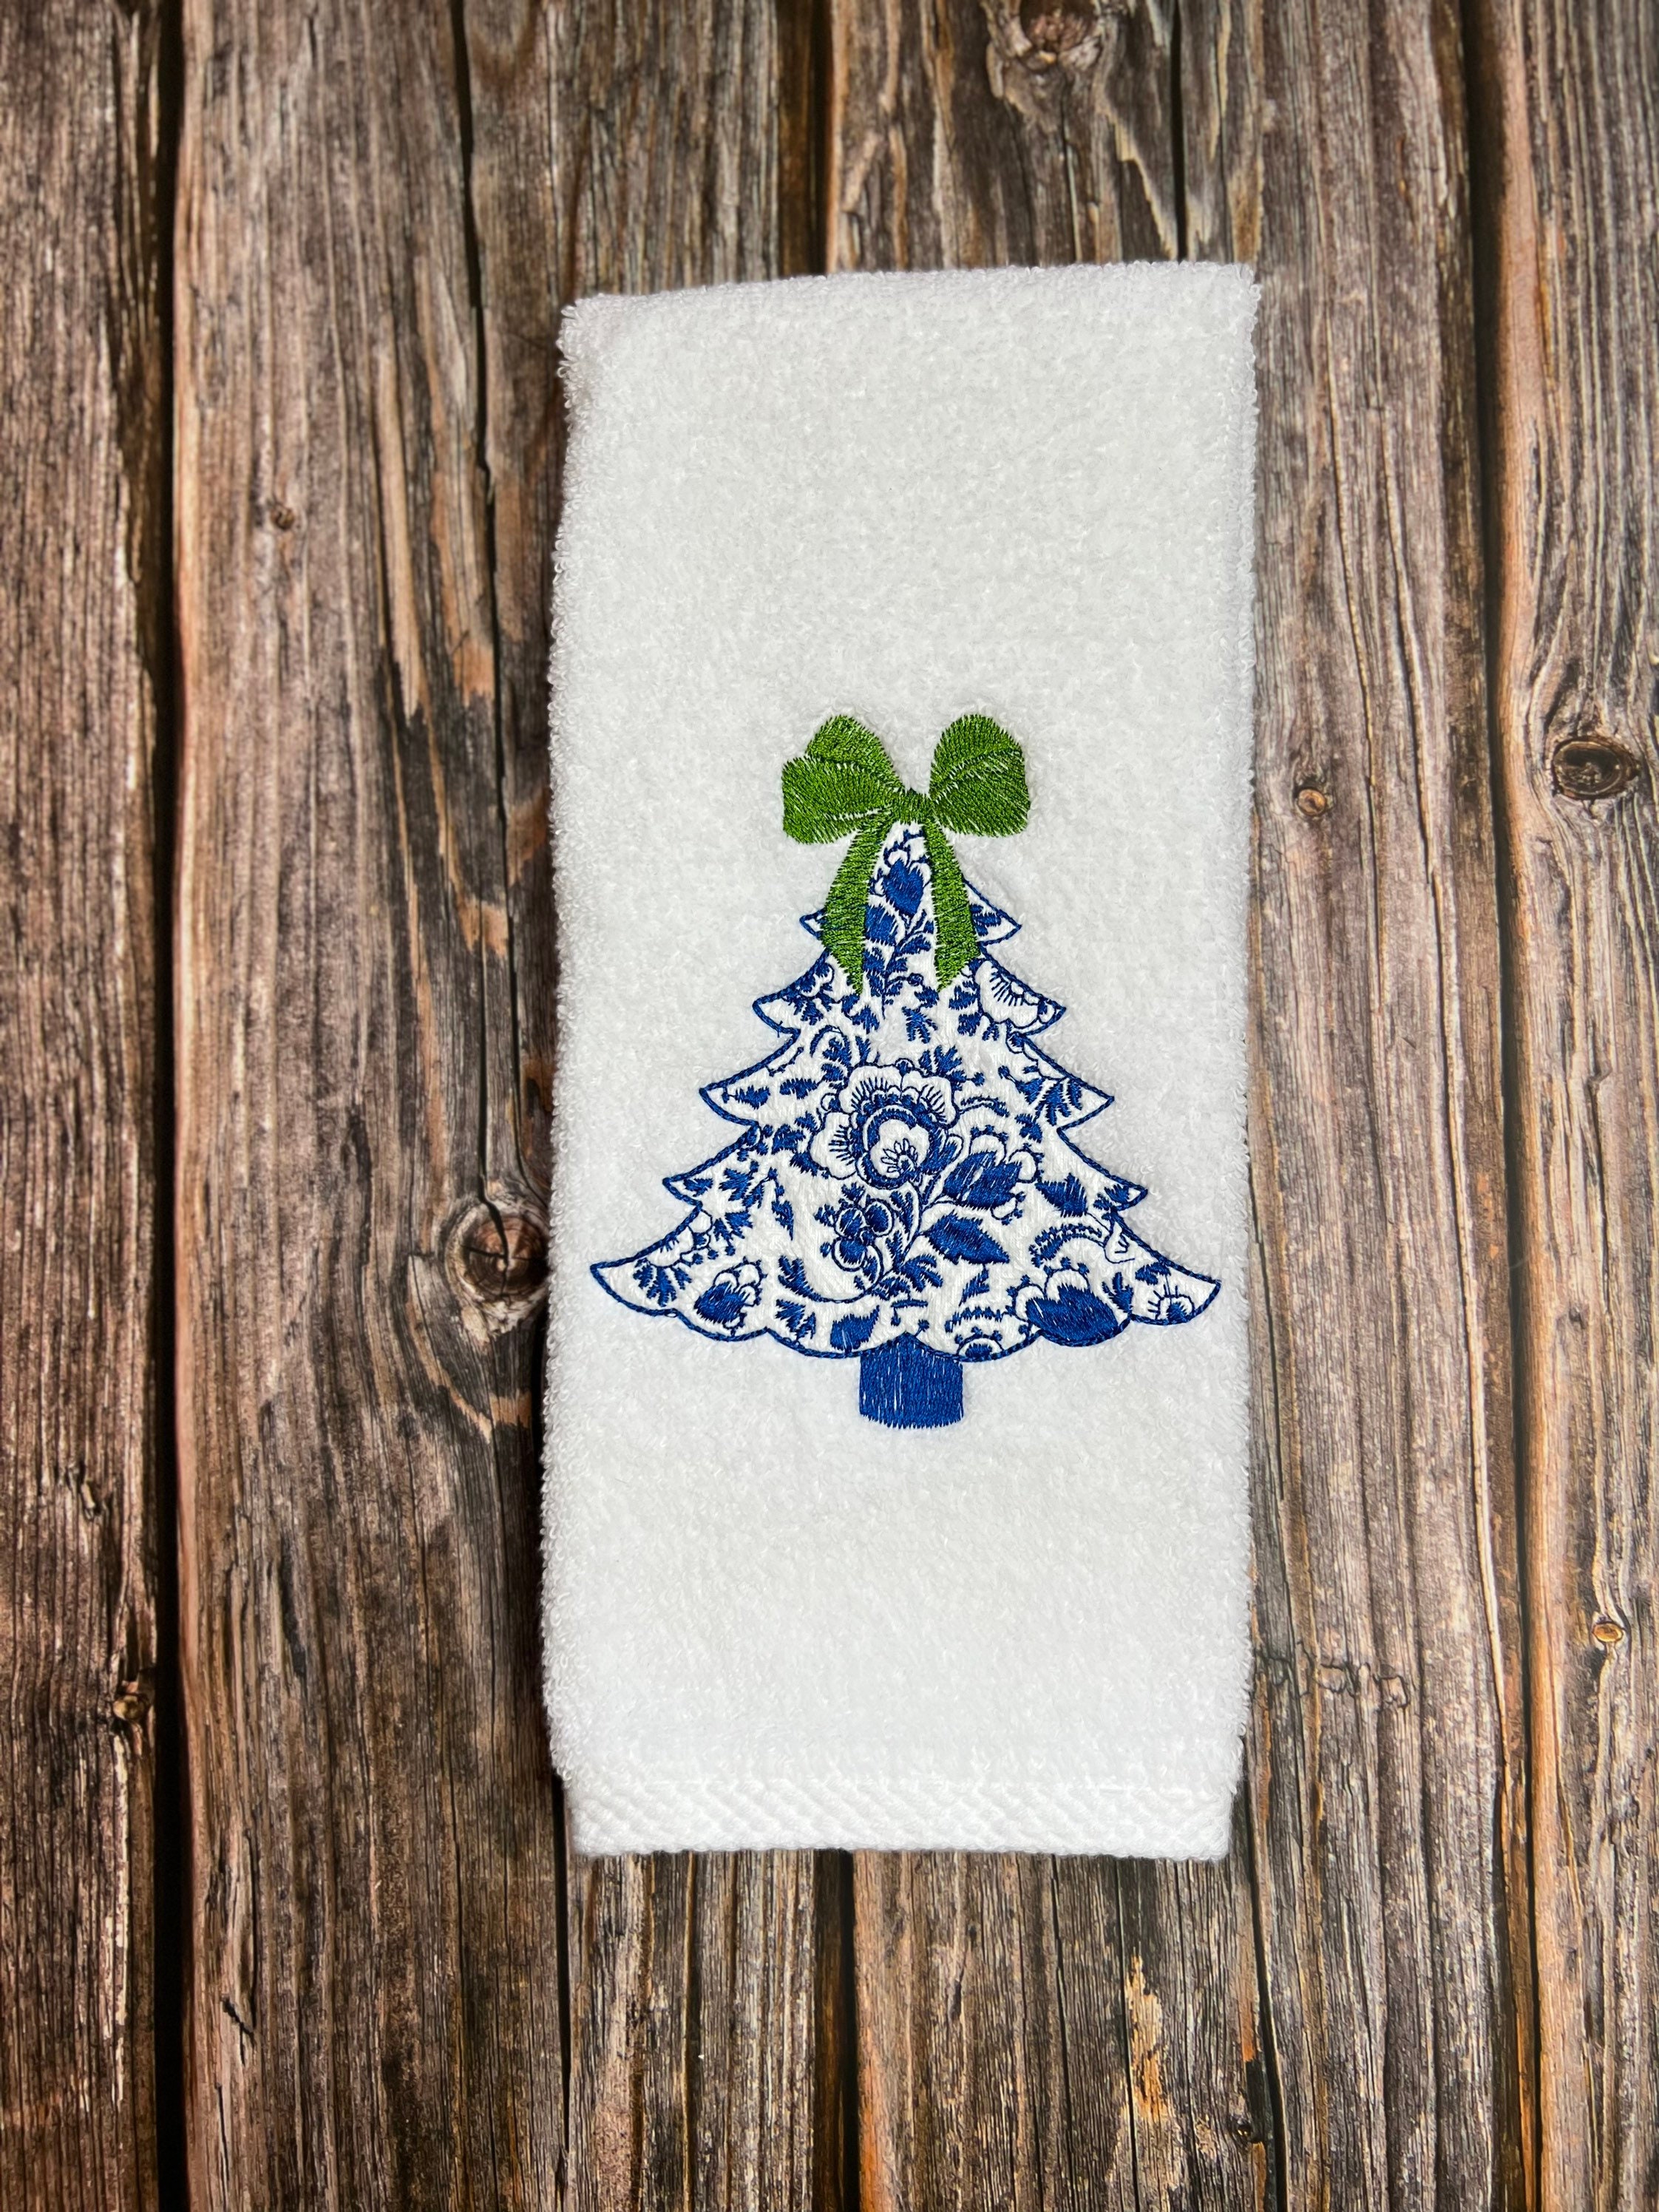 Chinoiserie Chic: Monogrammed Towels - My Favorite Best Buys